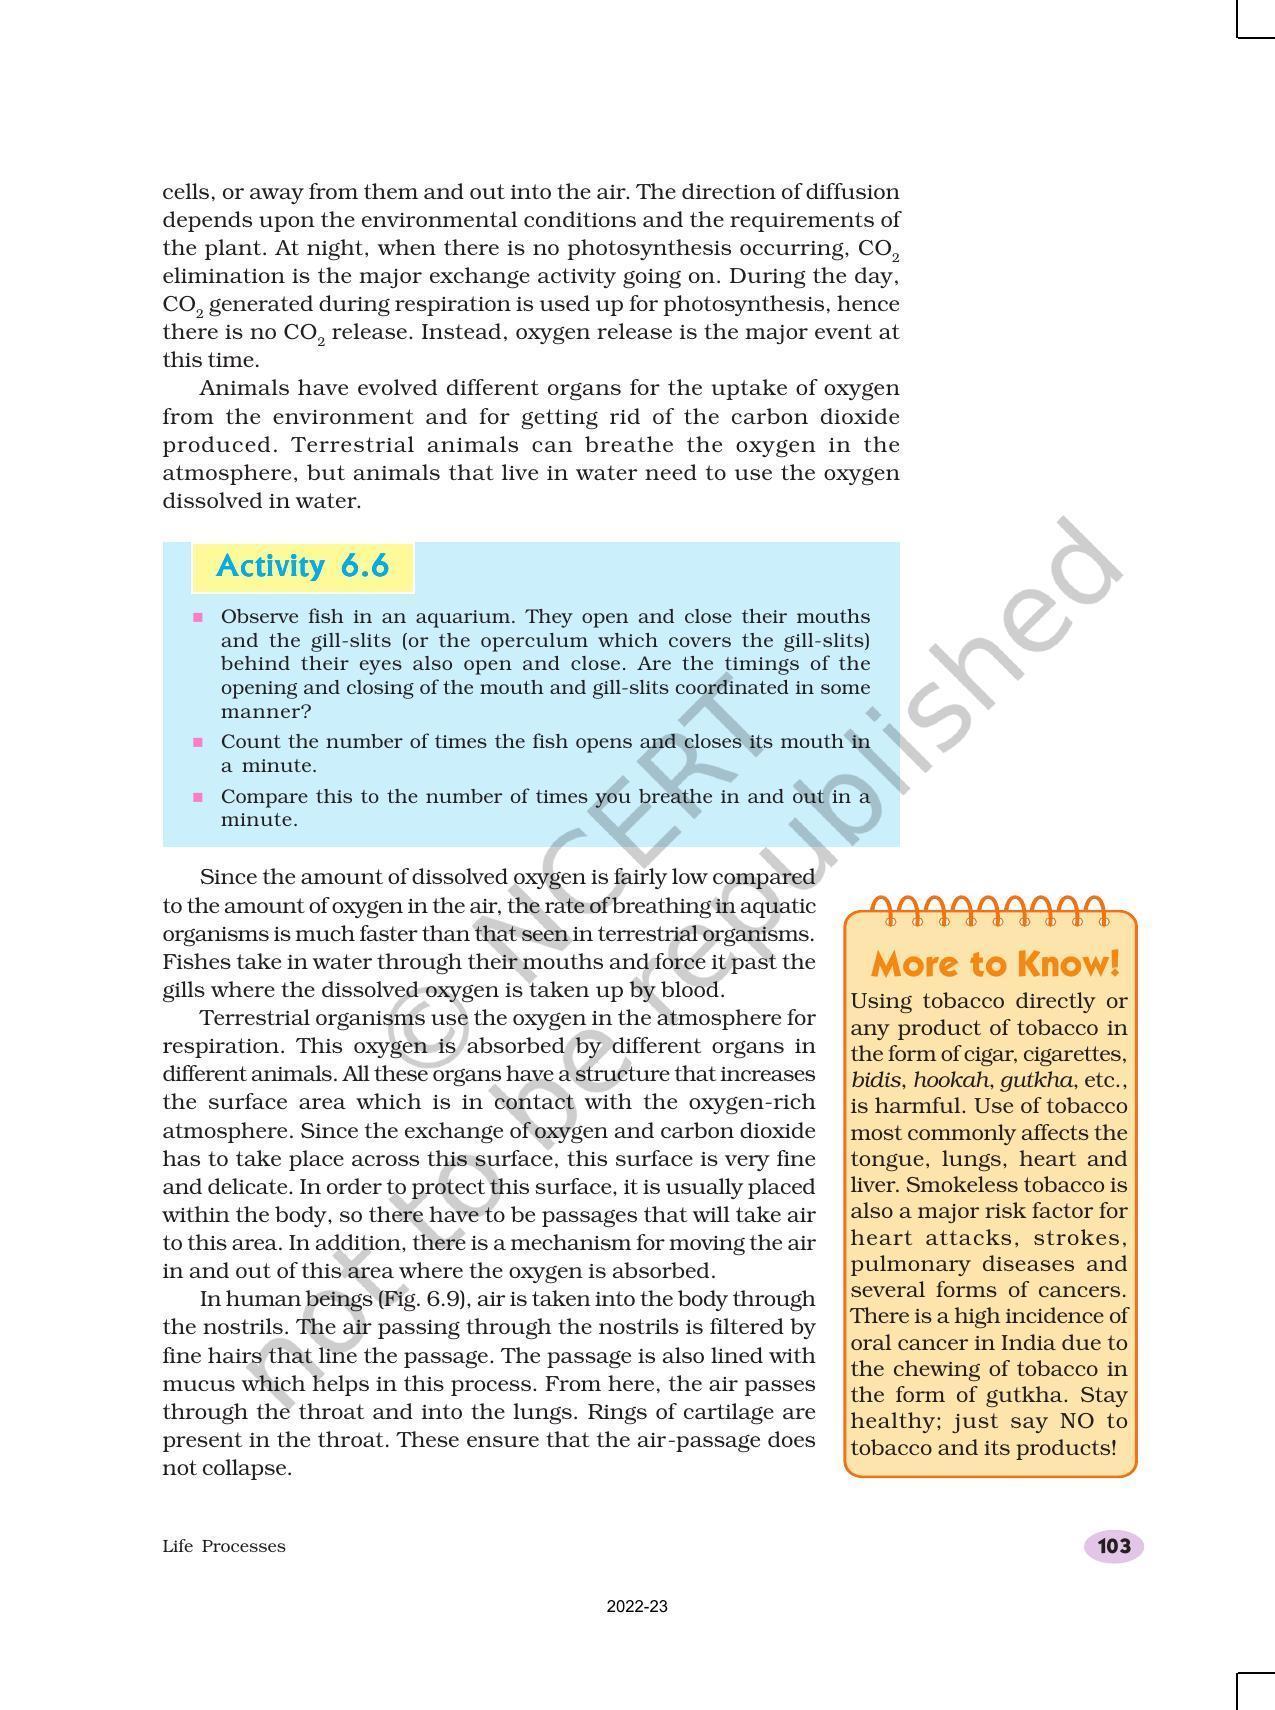 NCERT Book for Class 10 Science Chapter 6 Life Processes - Page 11